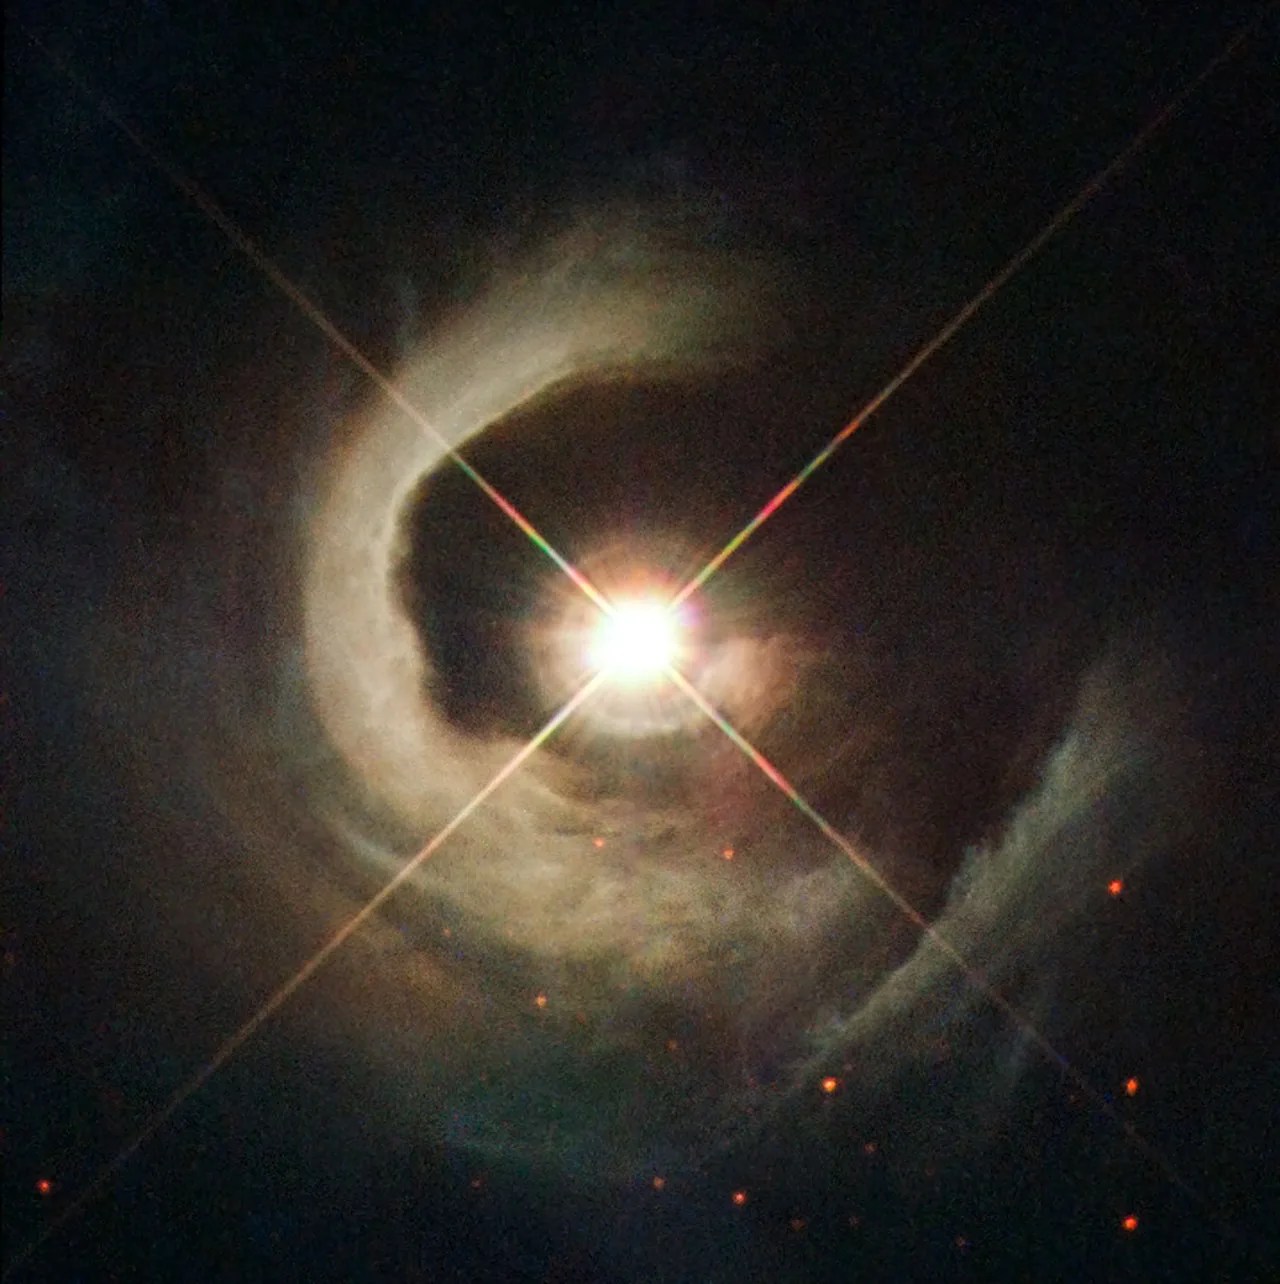 A star with a spiral of dust bordering it